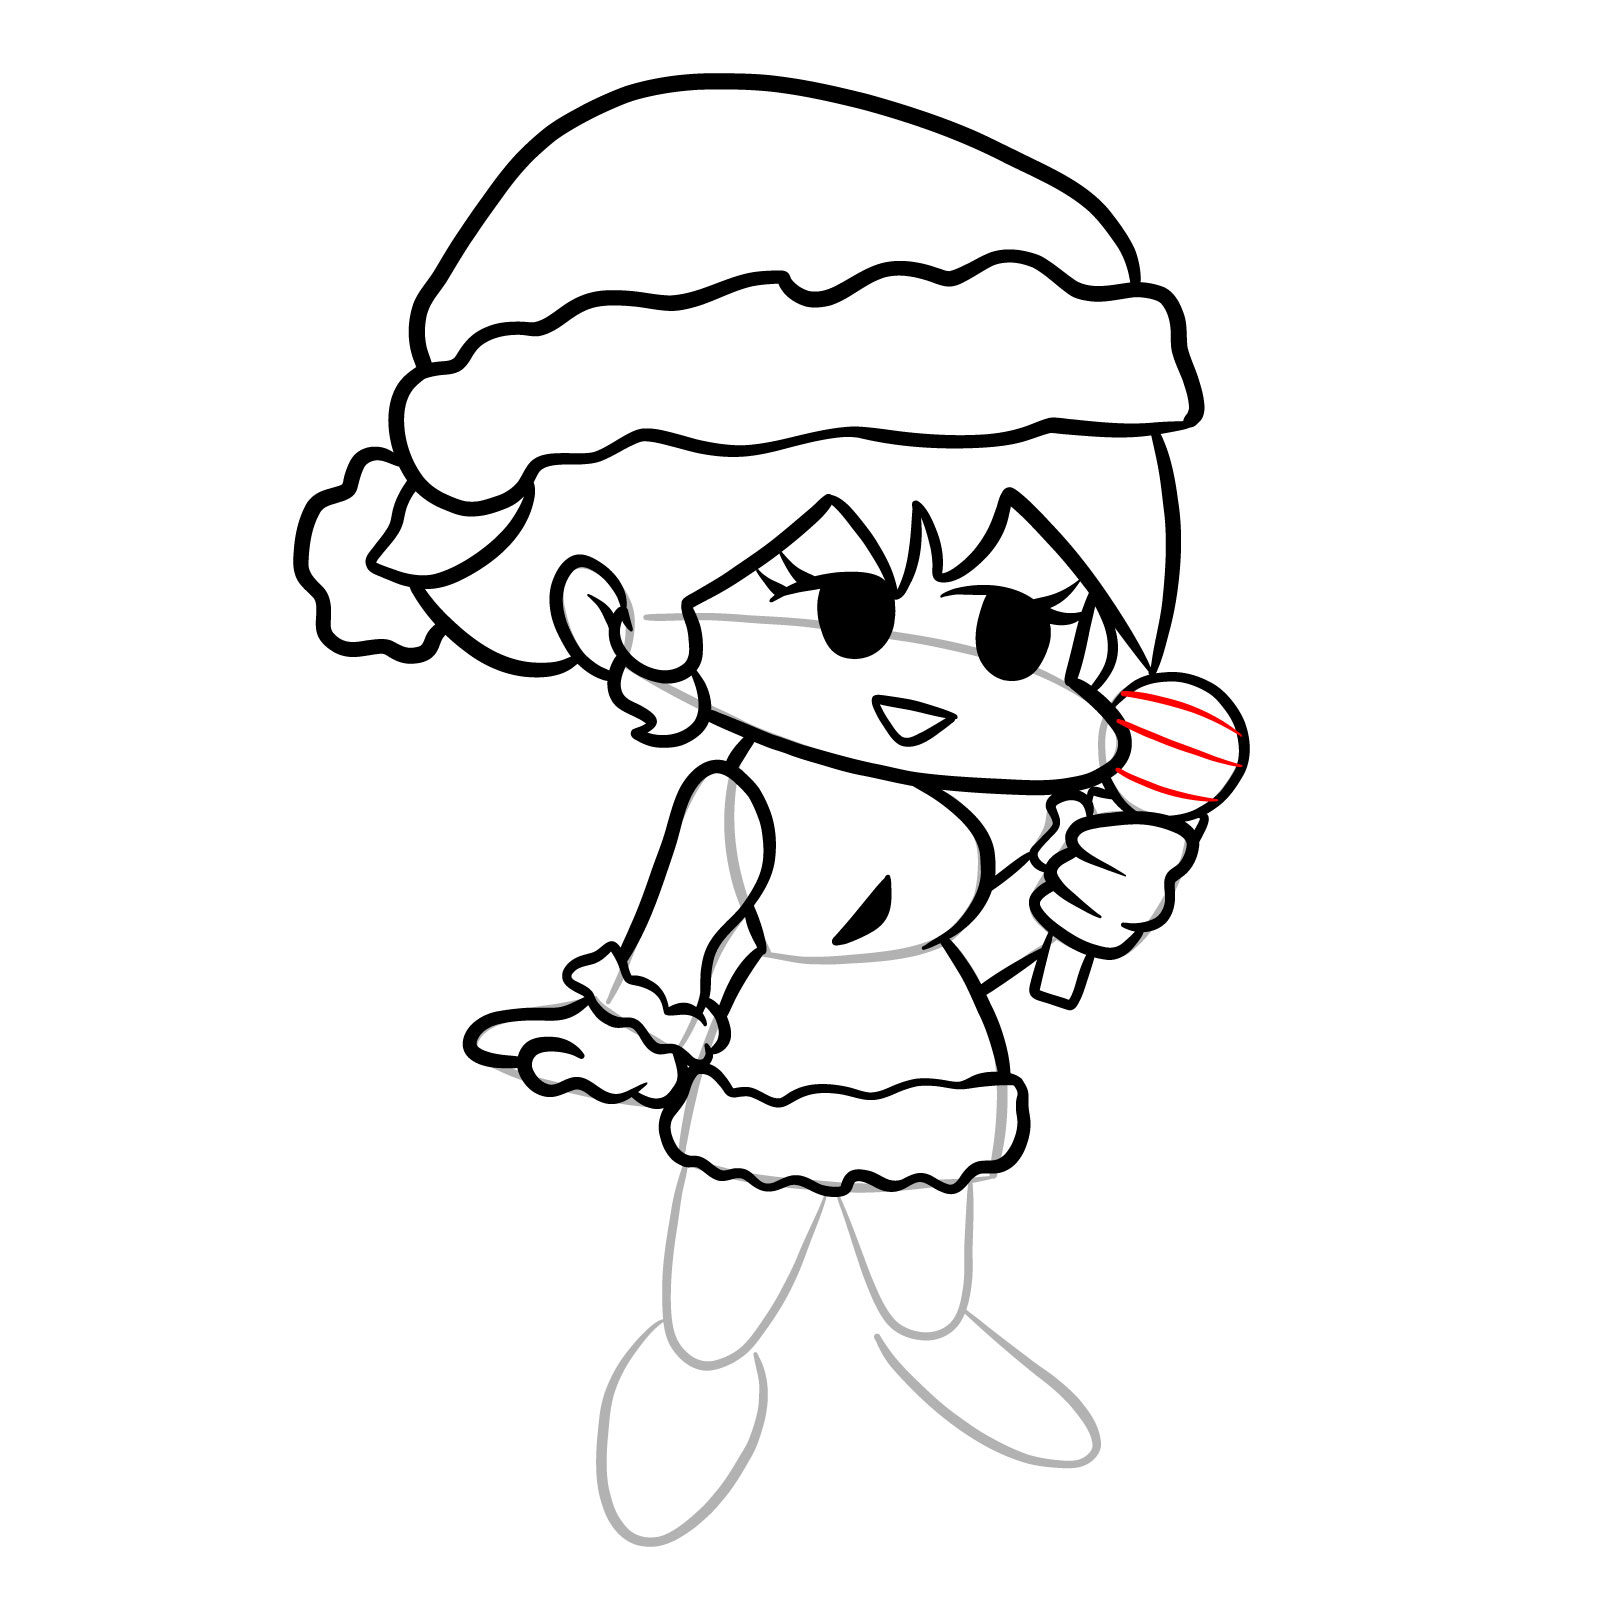 How to draw standing Santa GF - step 21